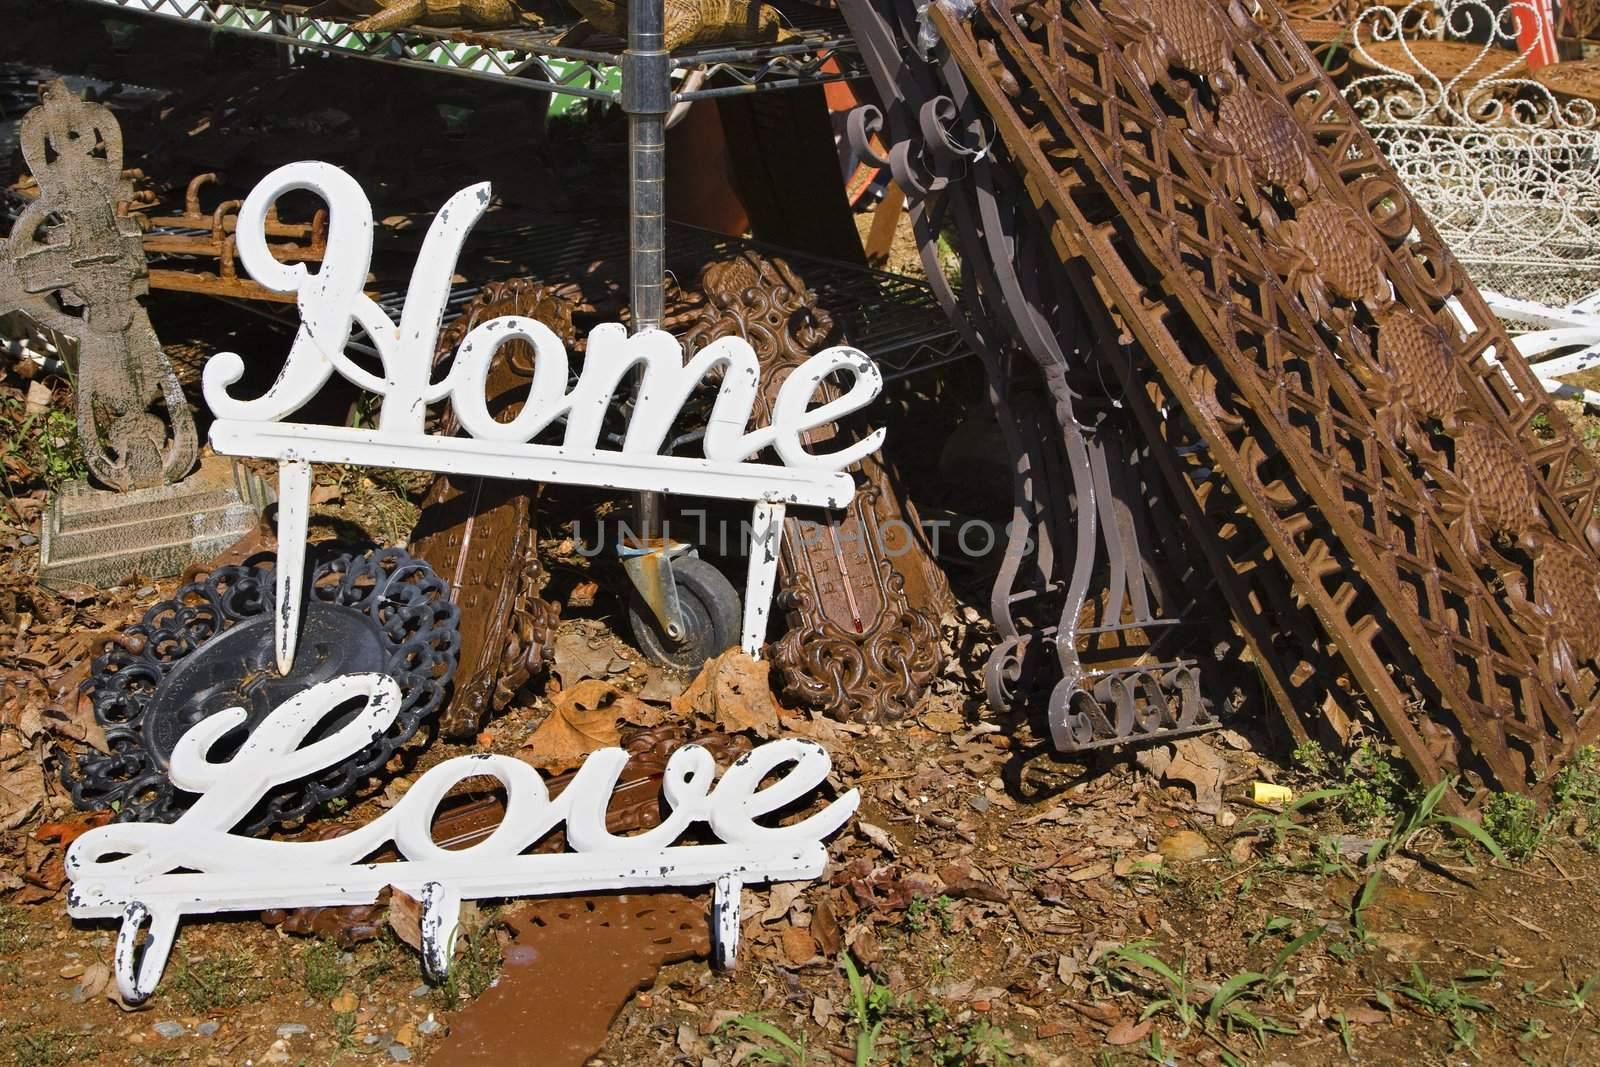 Metal garden decorations of words Love and Home next to rusted metal objects.